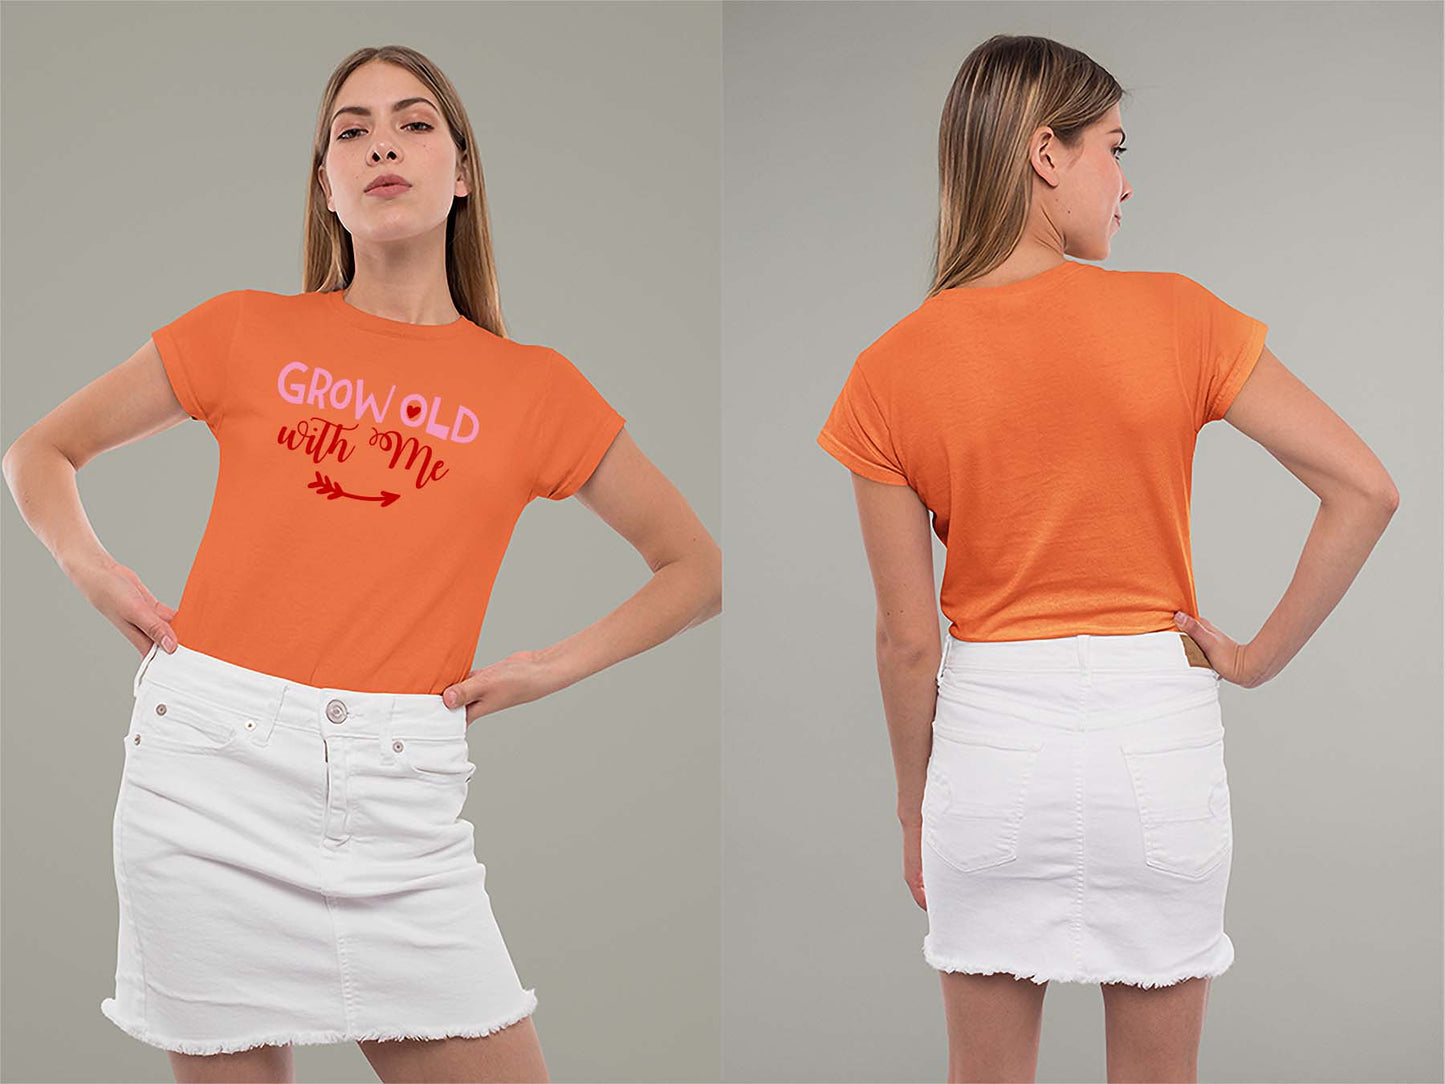 Fat Dave Grow Old With Me Ladies Crew (Round) Neck Shirt Small Orange